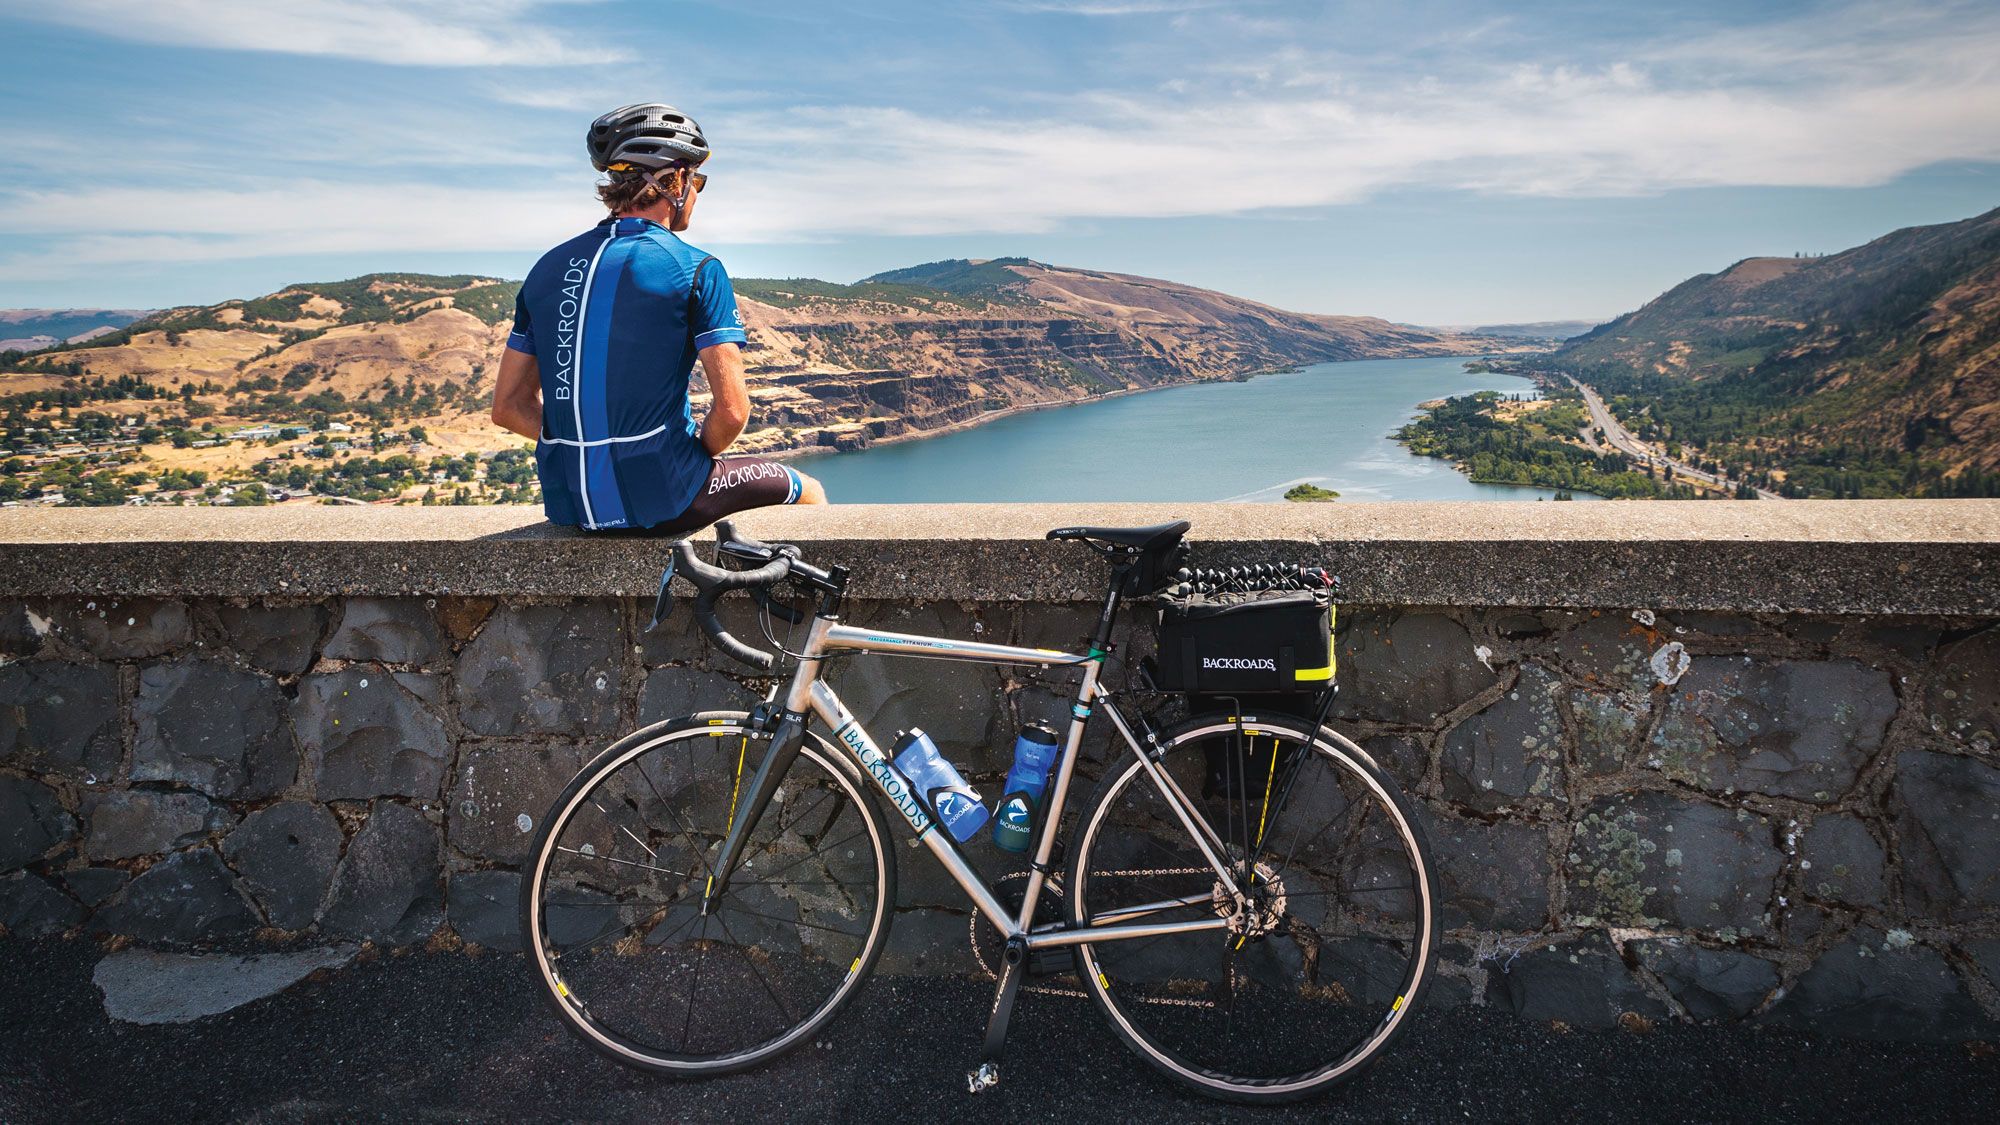 A cyclist pauses to take in the view on Backroads’ Columbia River Gorge Bike Tour. (Photo by Andrew Opila/Backroads)